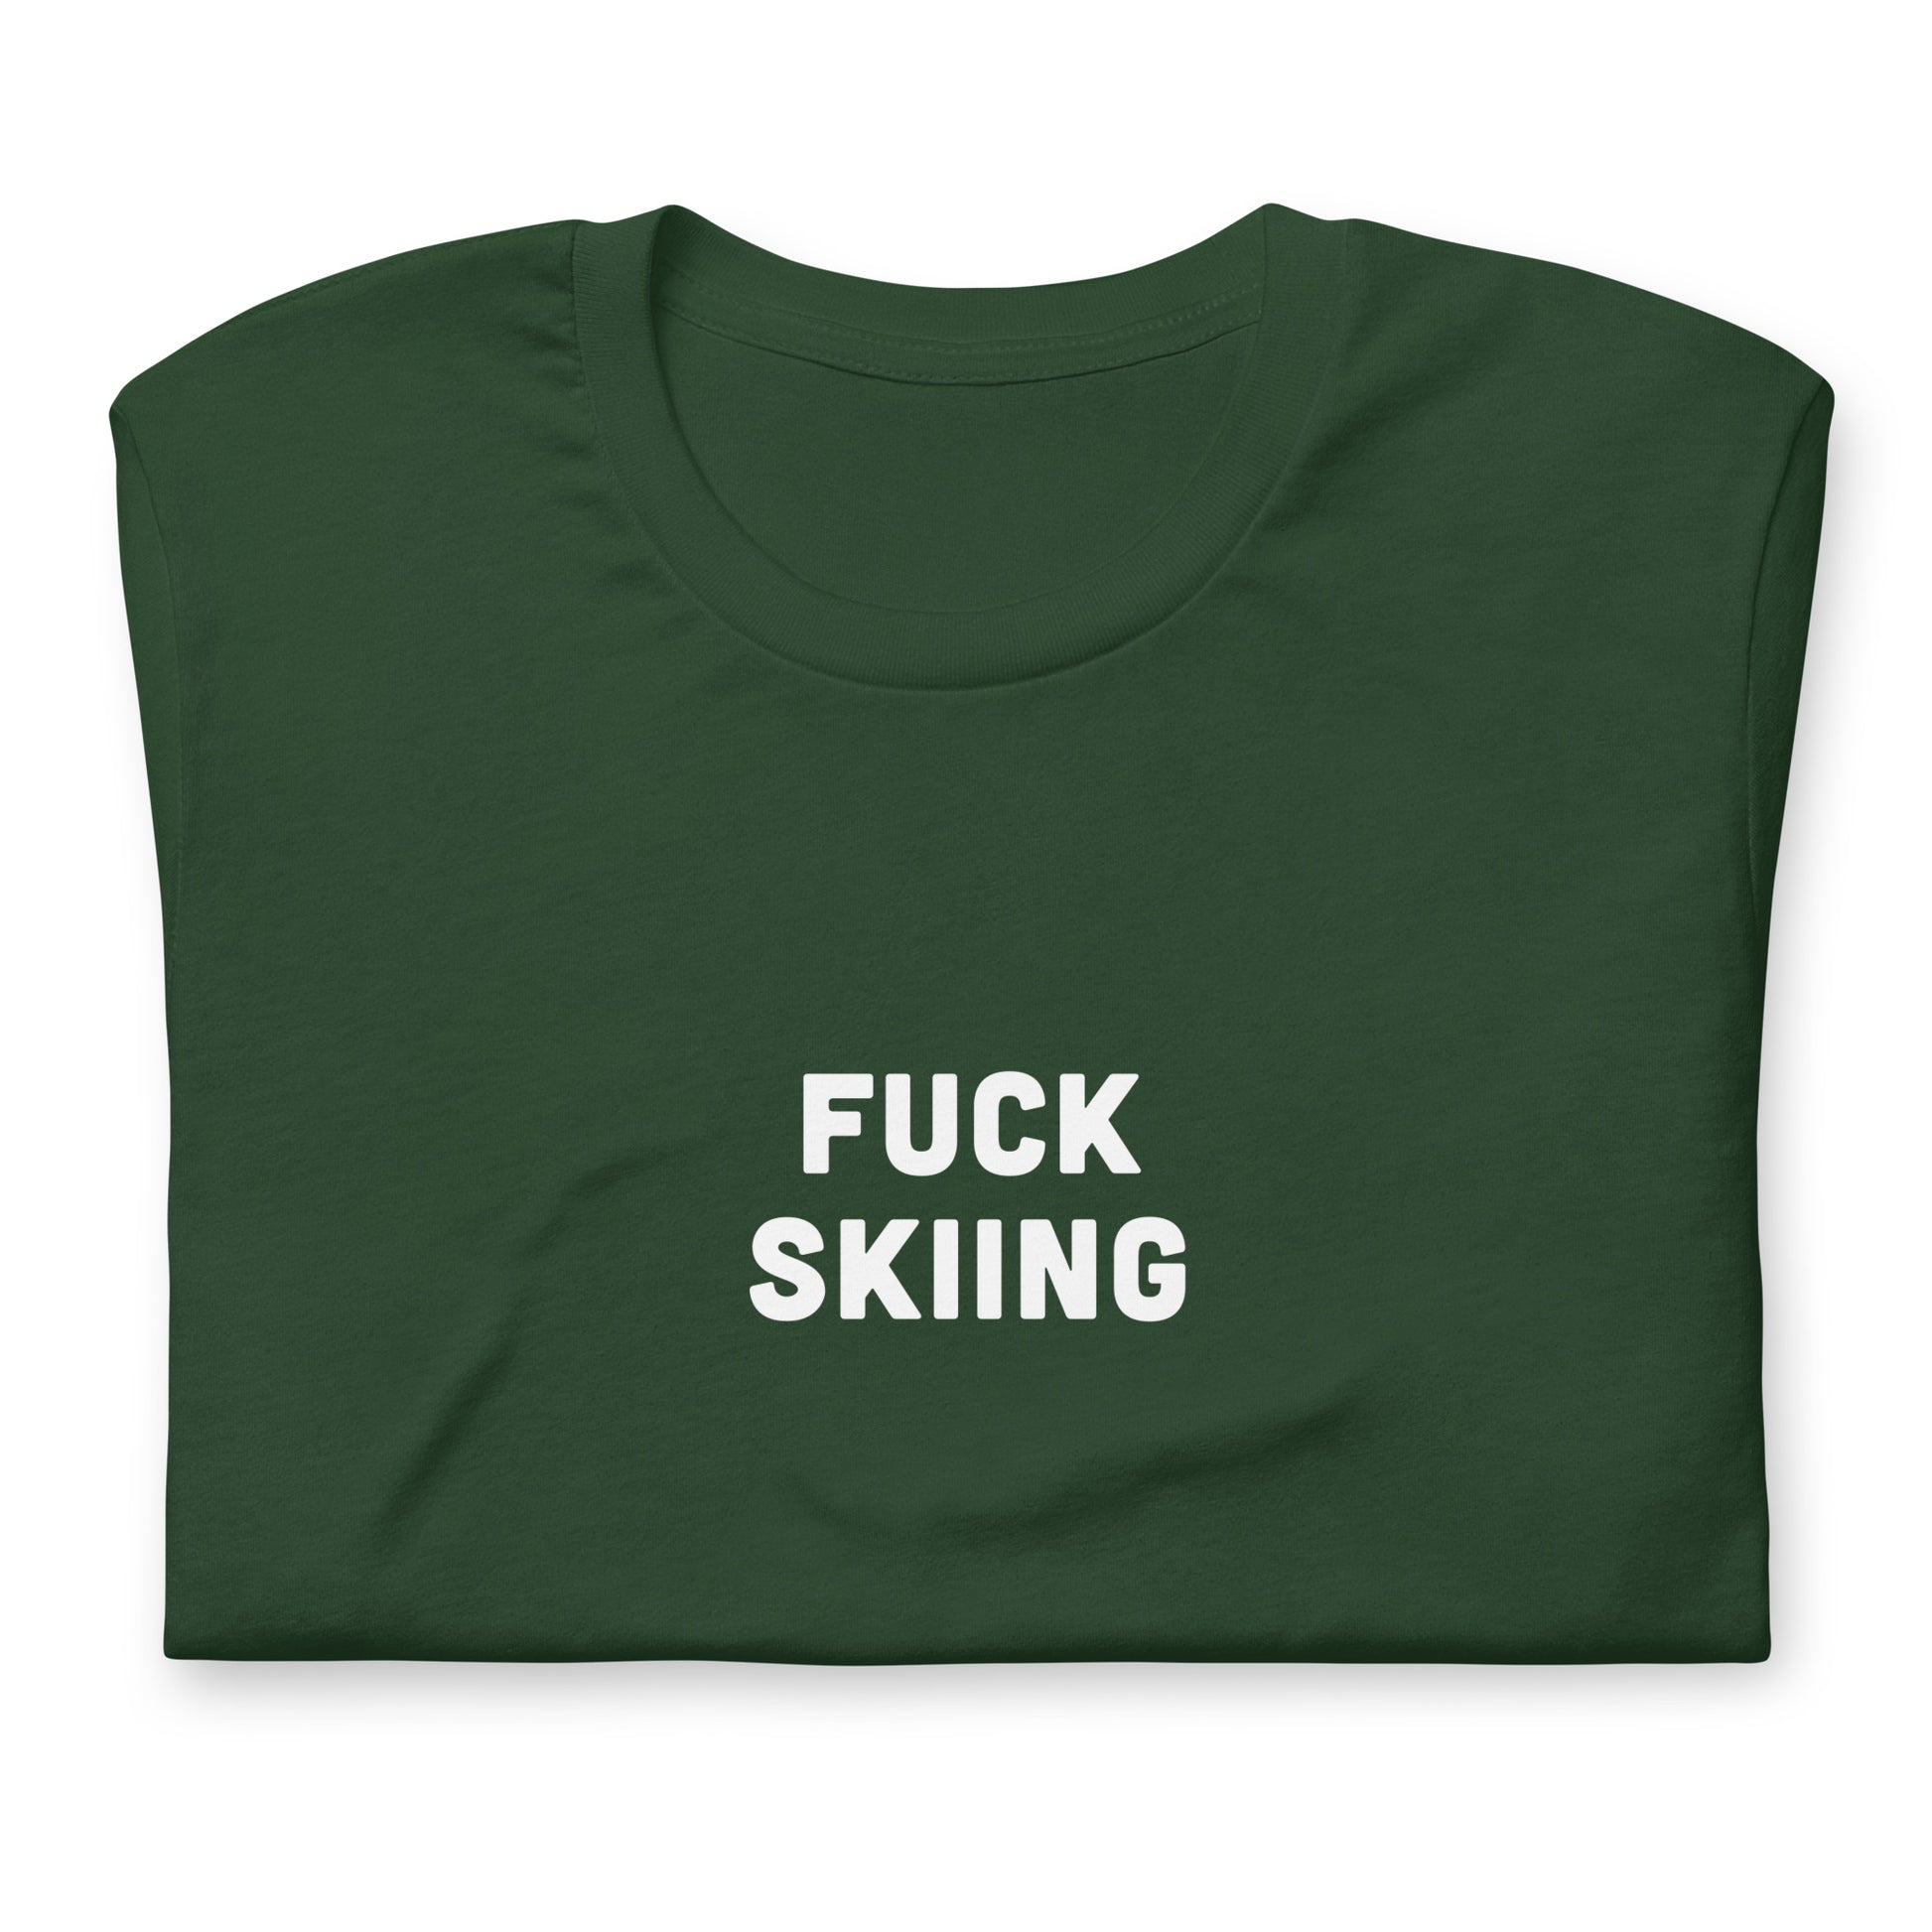 Fuck Skiing T-Shirt Size XL Color Black